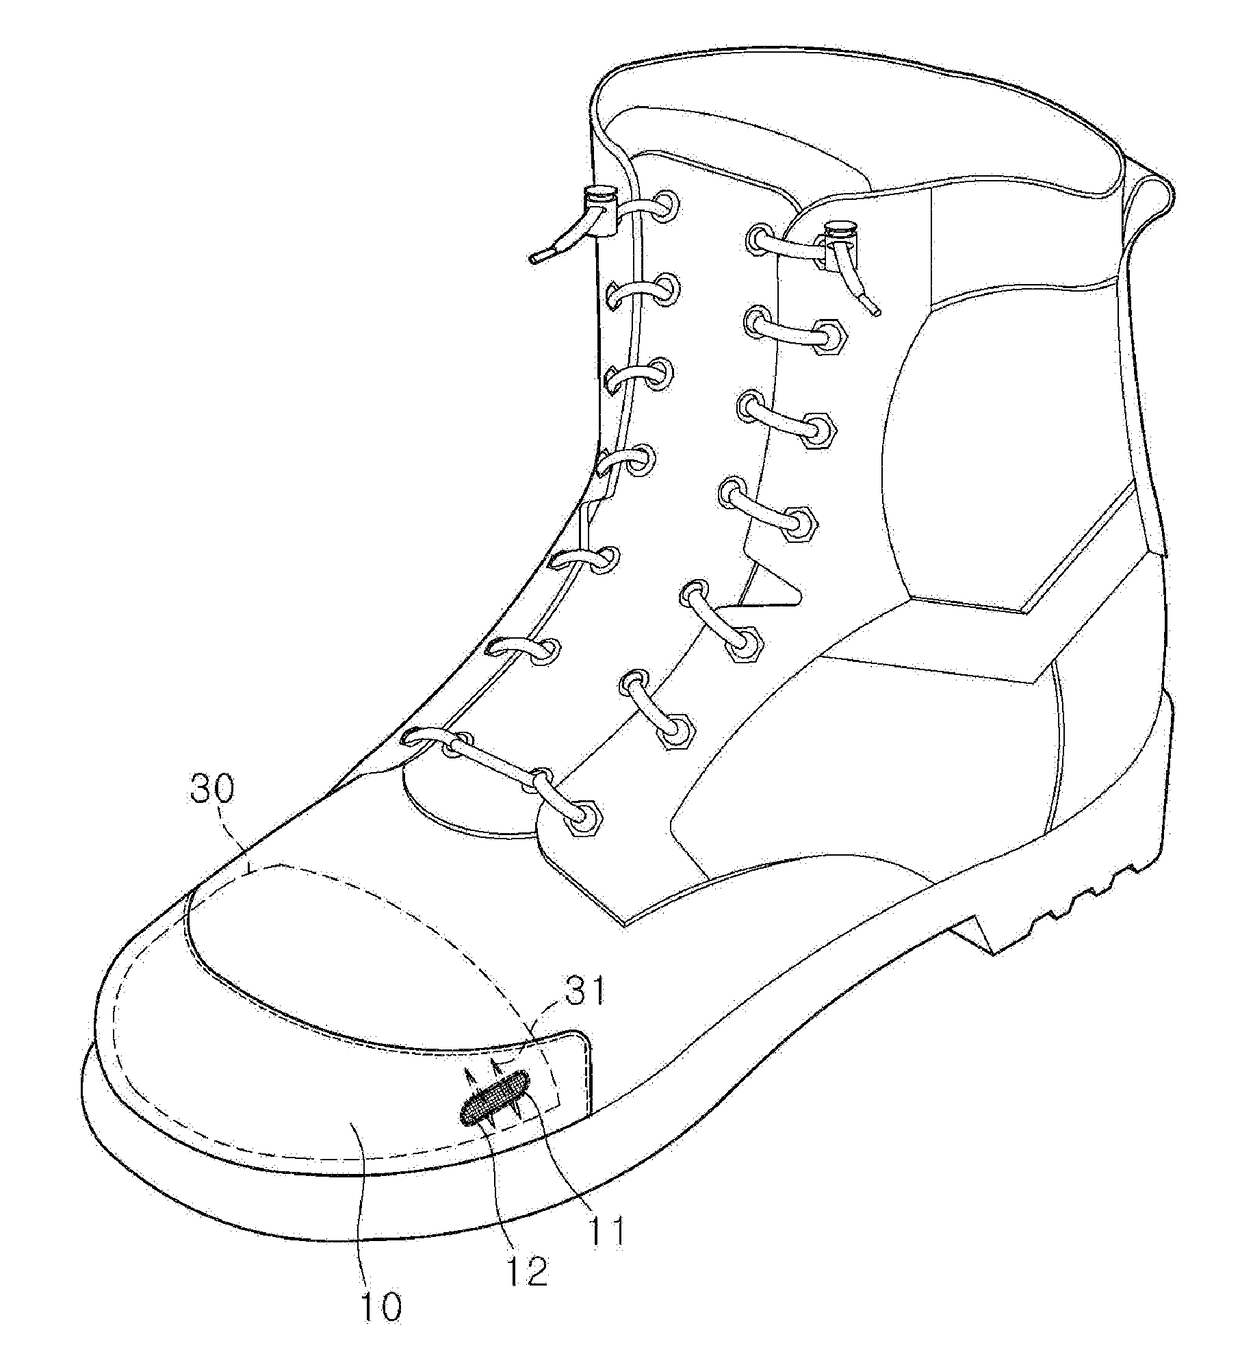 Safety shoes with a ventilation structure